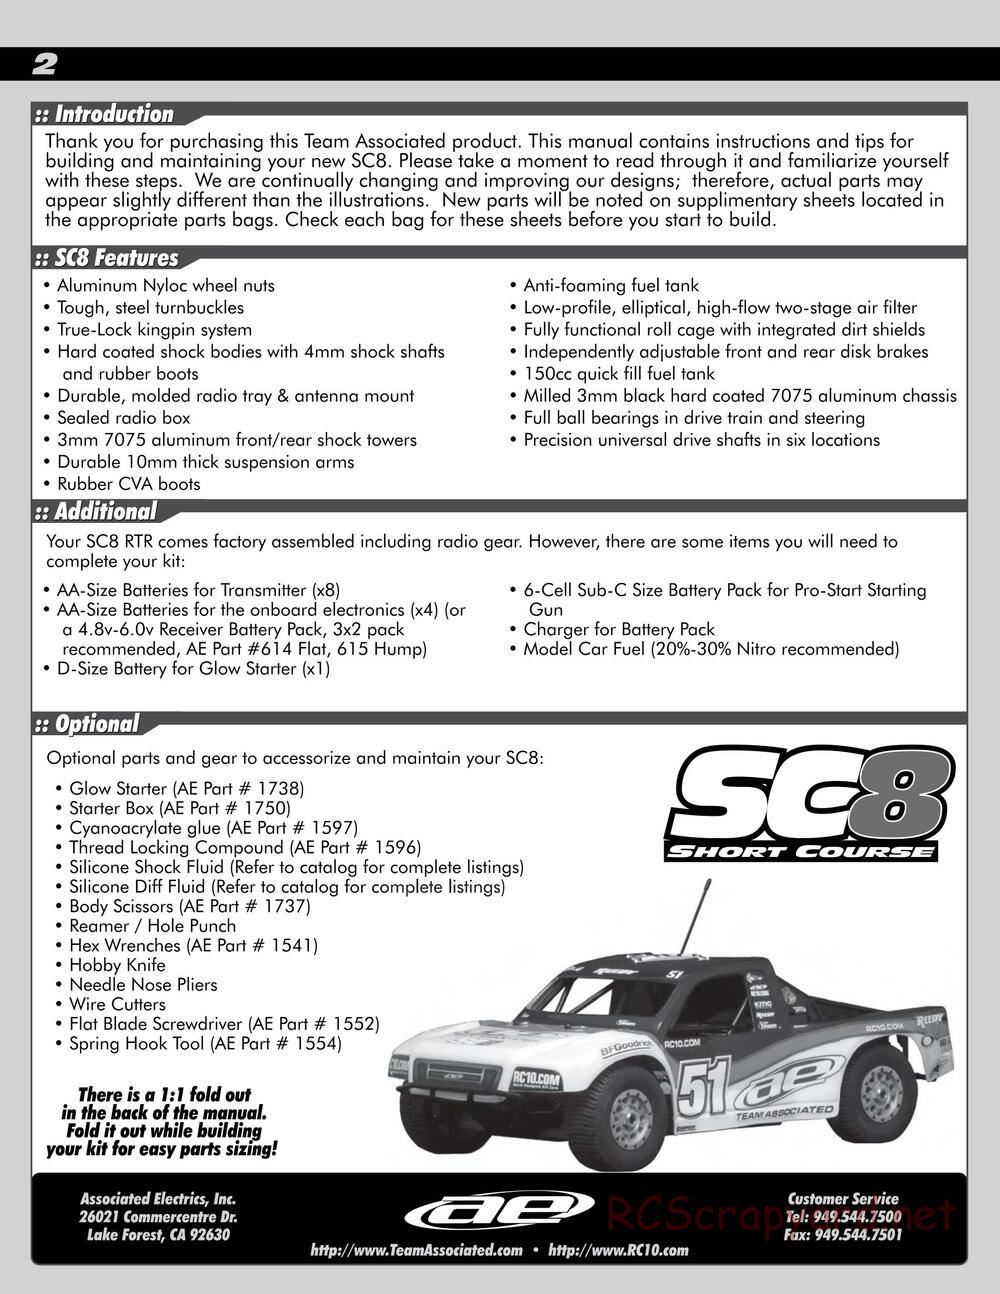 Team Associated - SC8 - Manual - Page 2